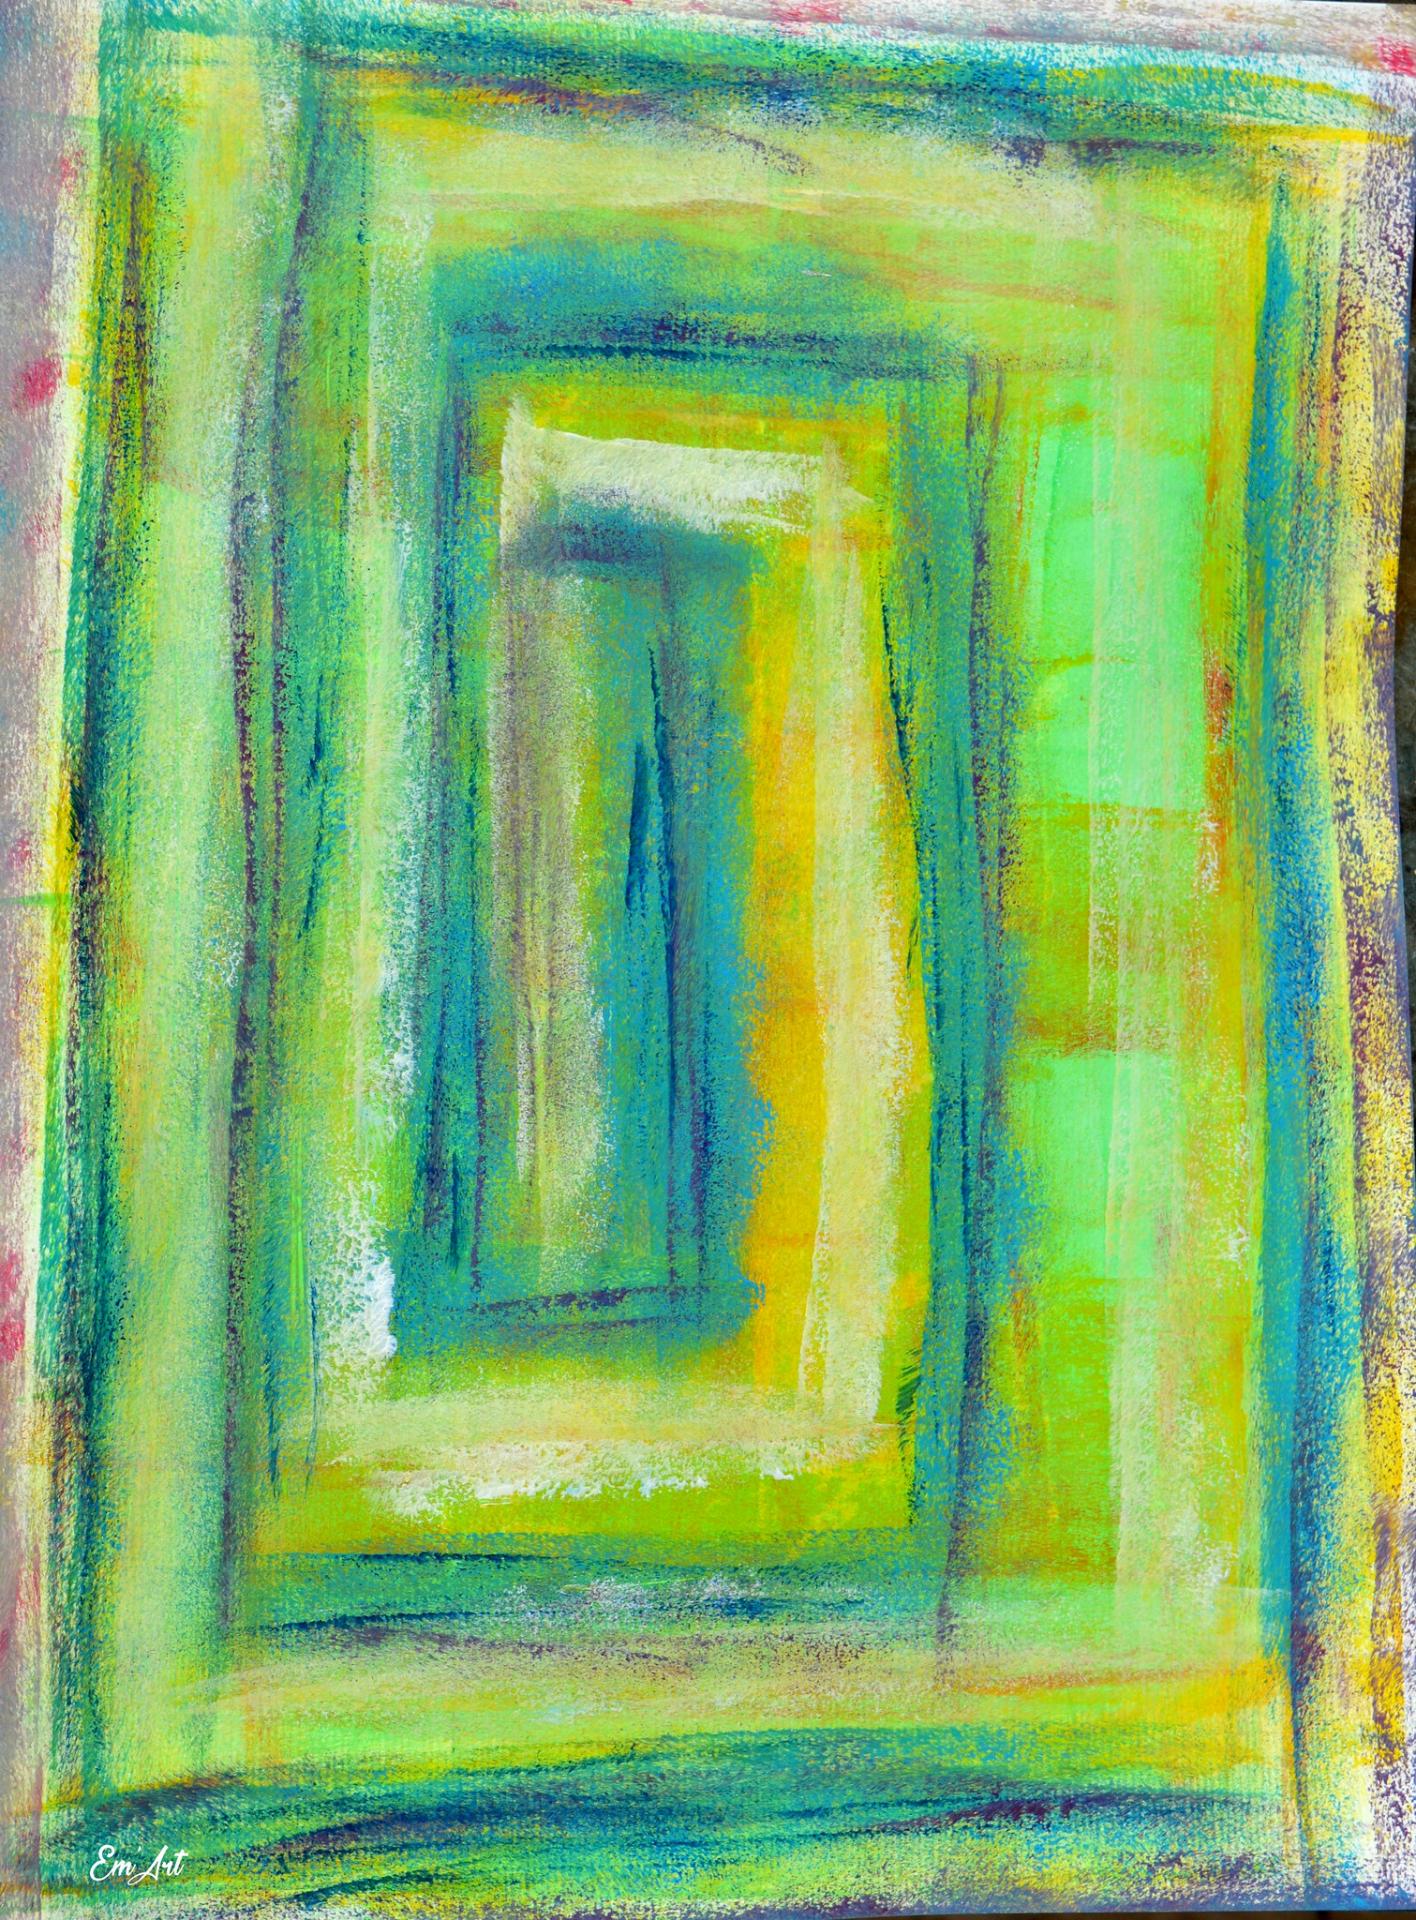 Aperture, abstract green surreal acrylic painting by Emmanuelle Baudry